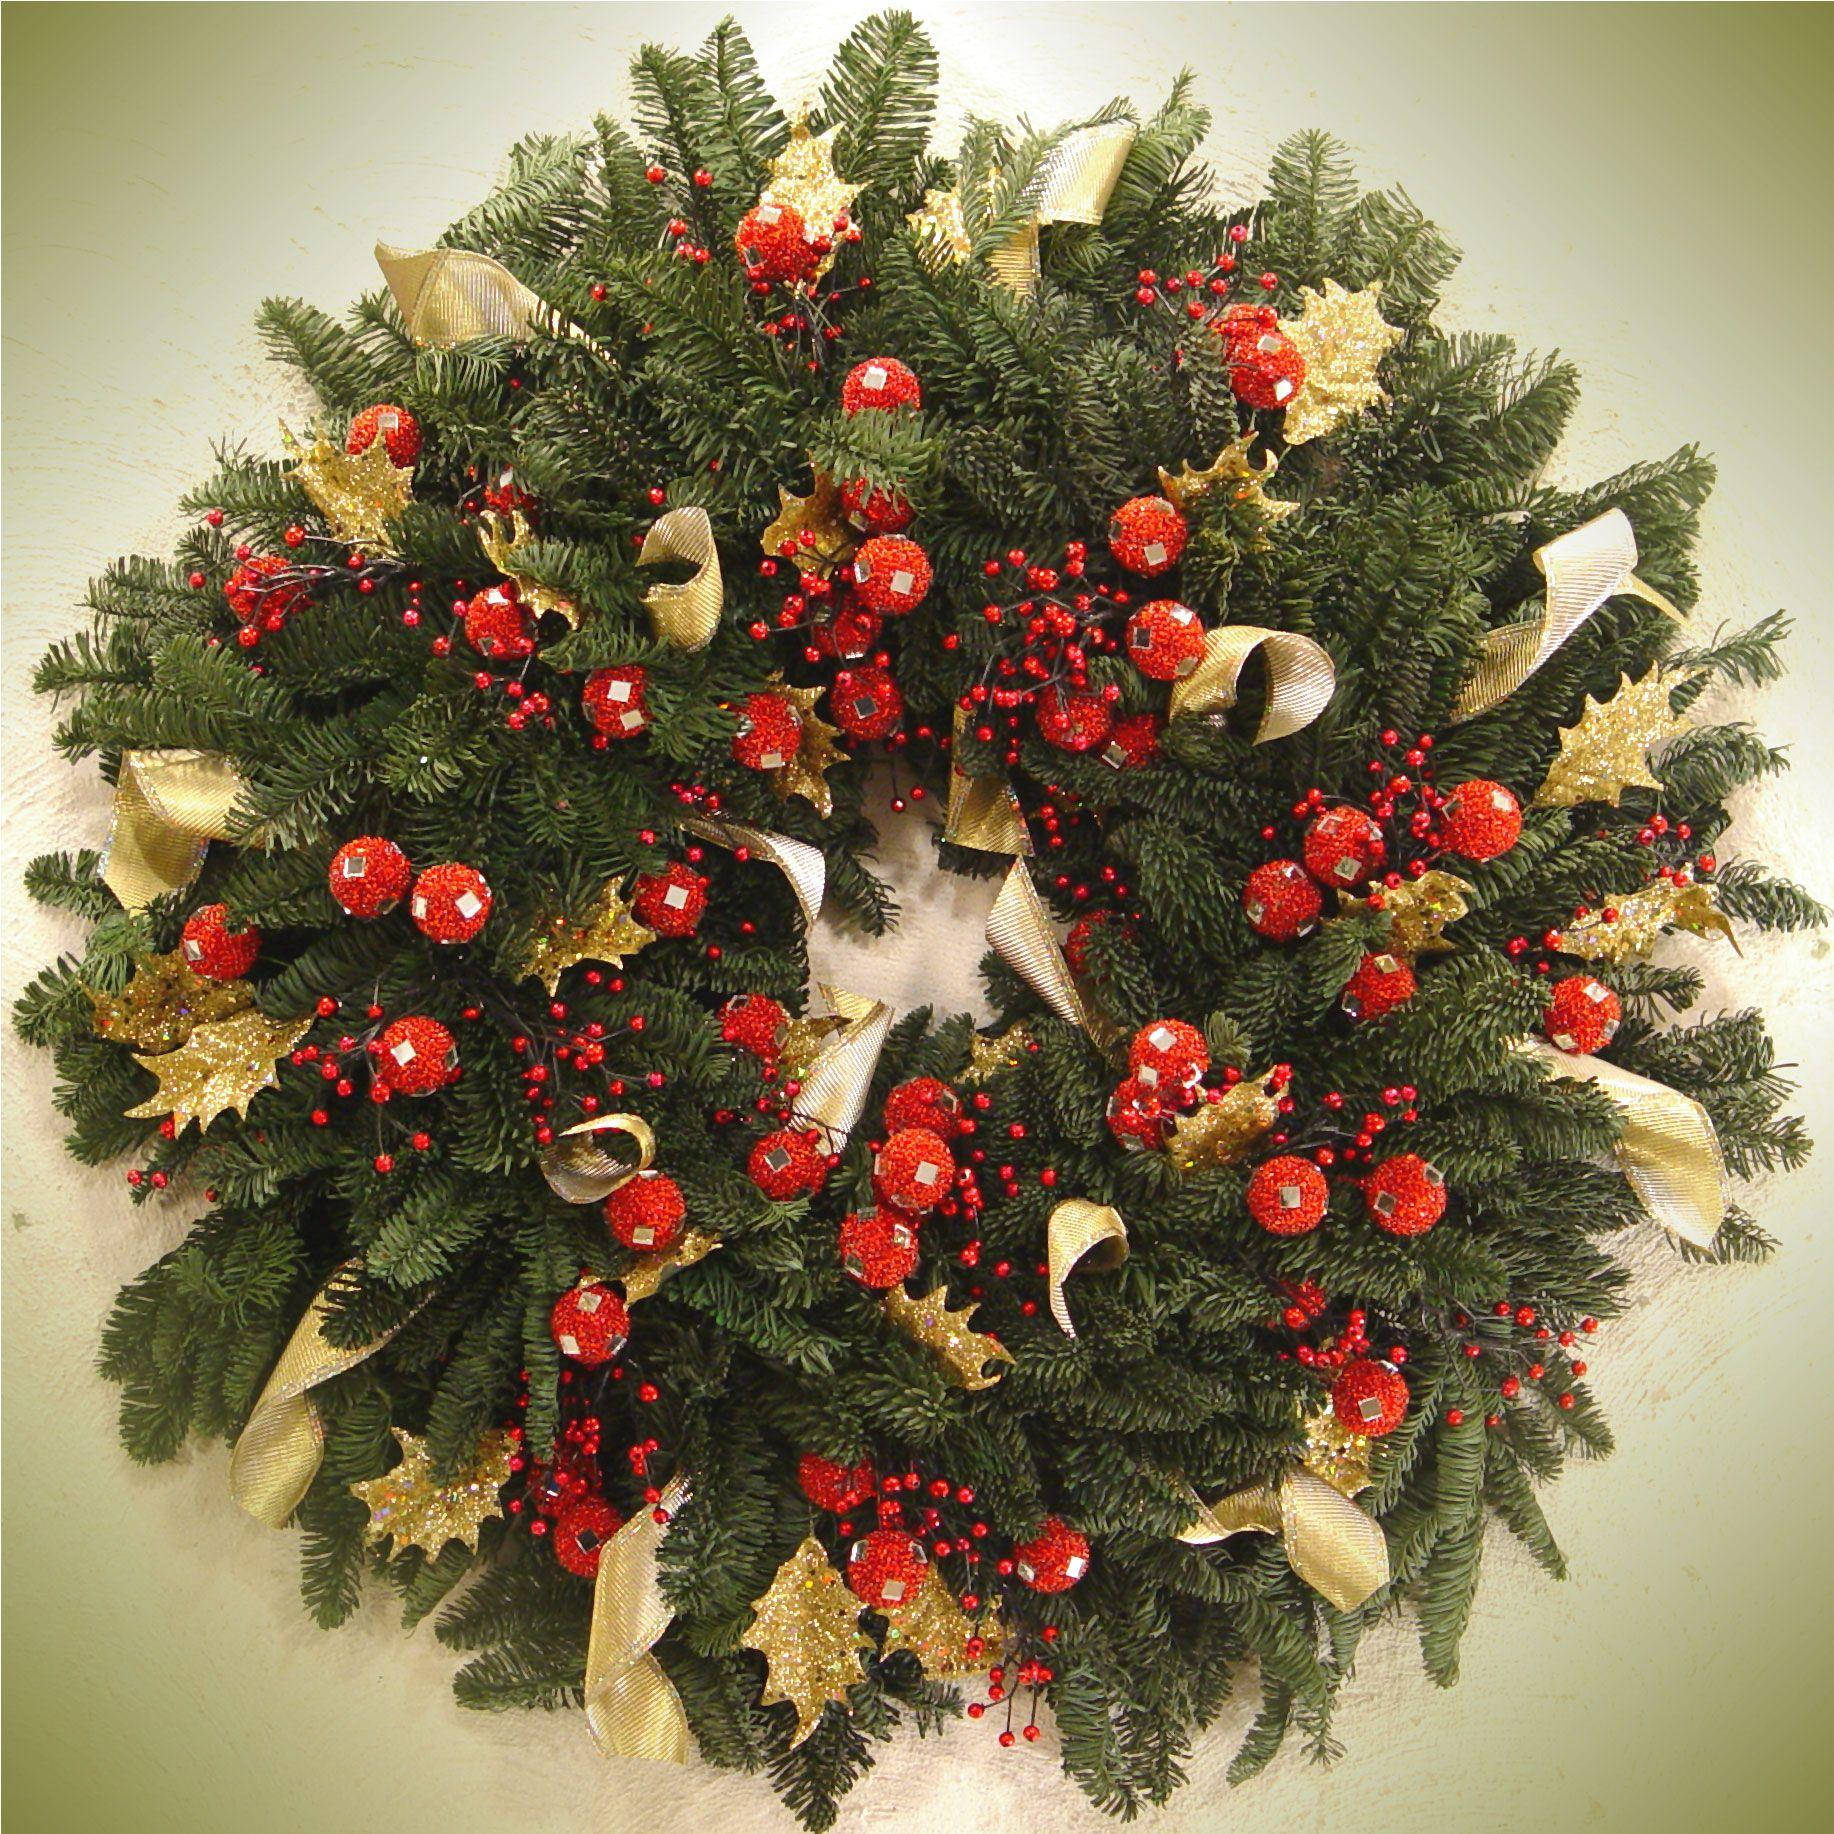 Captivating Christmas Wreath Adorned With Gold Ribbons Background